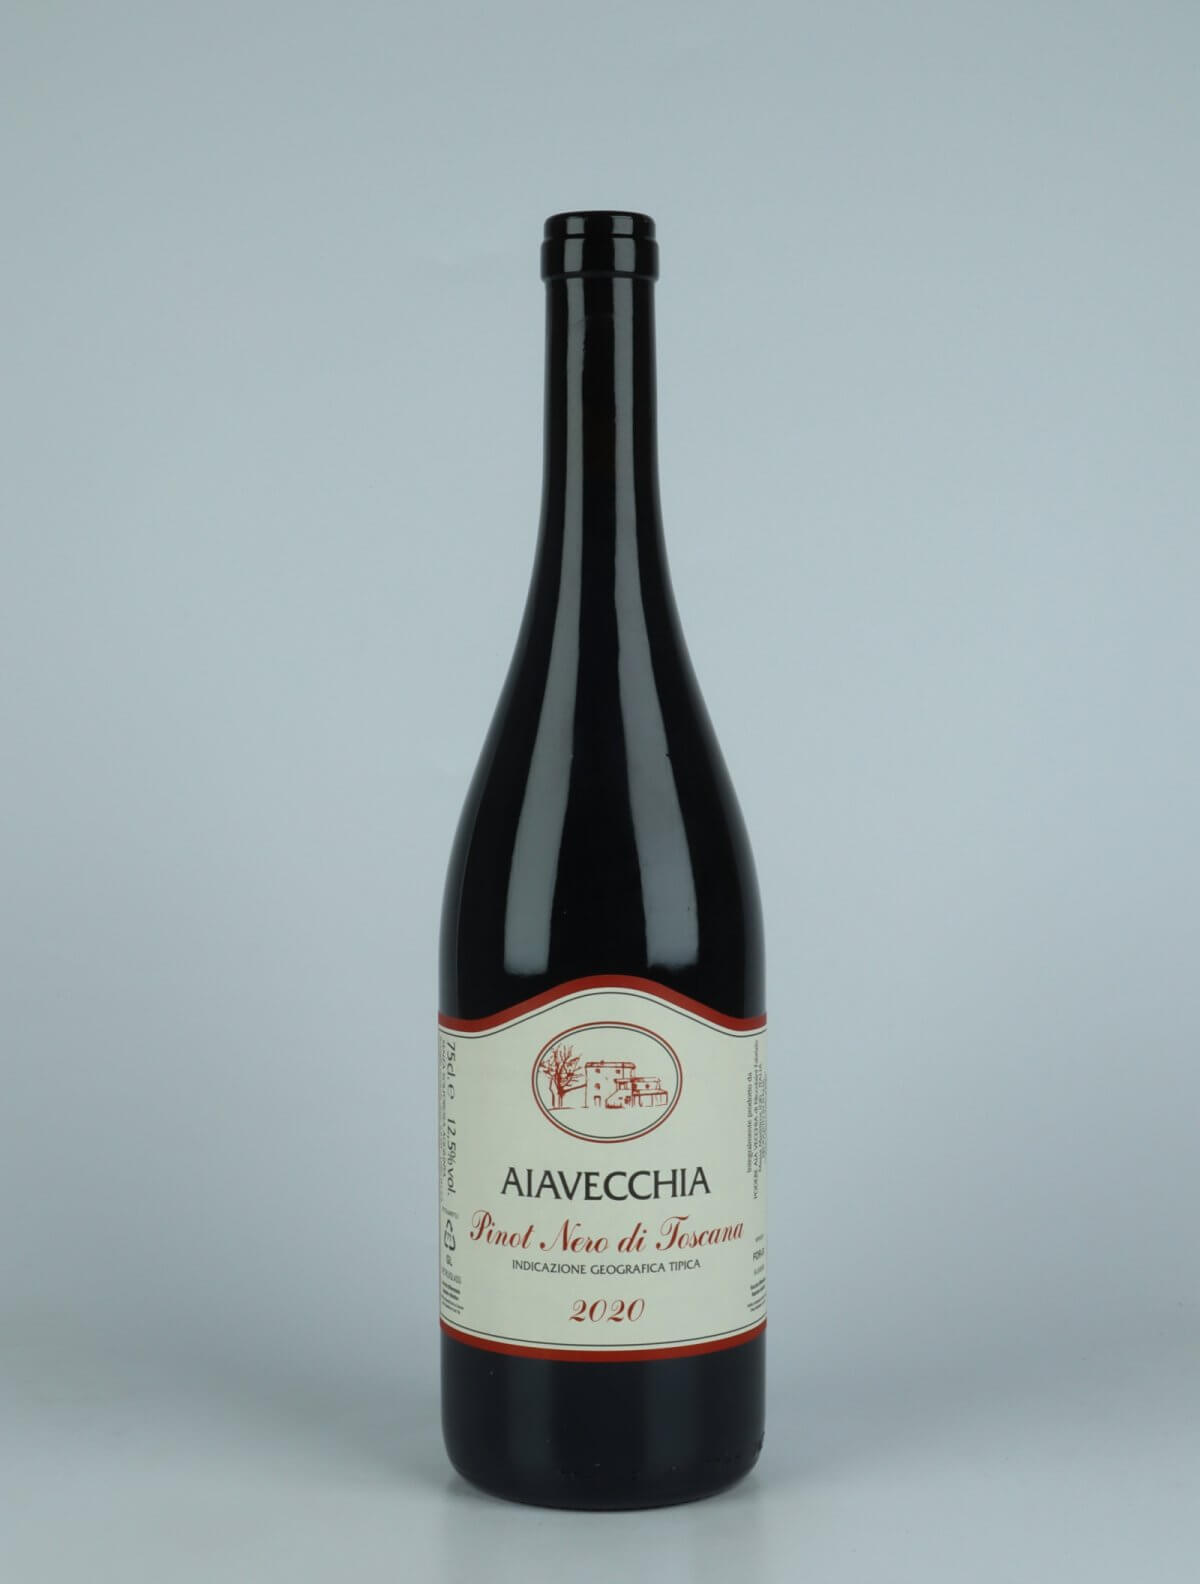 A bottle 2020 Pinot Nero Red wine from Aia Vecchia, Tuscany in Italy